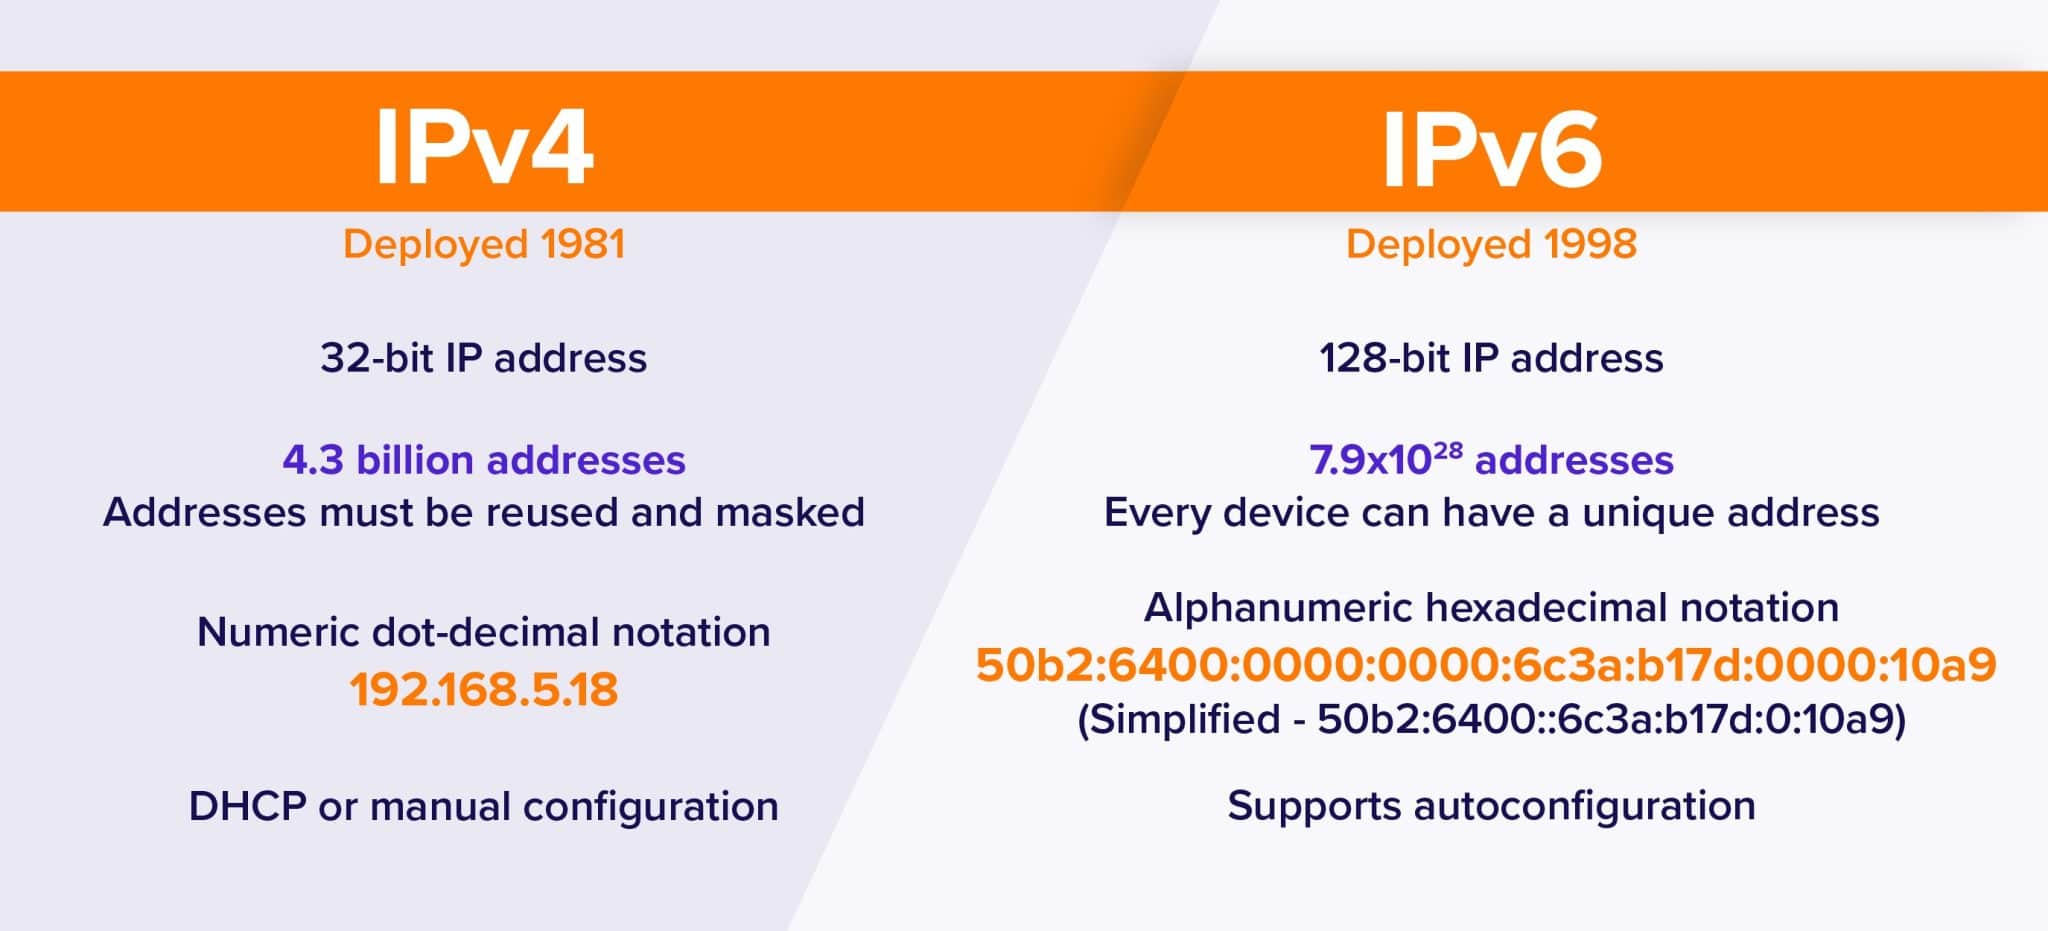 Summary table of the 2 versions of IP addresses. 